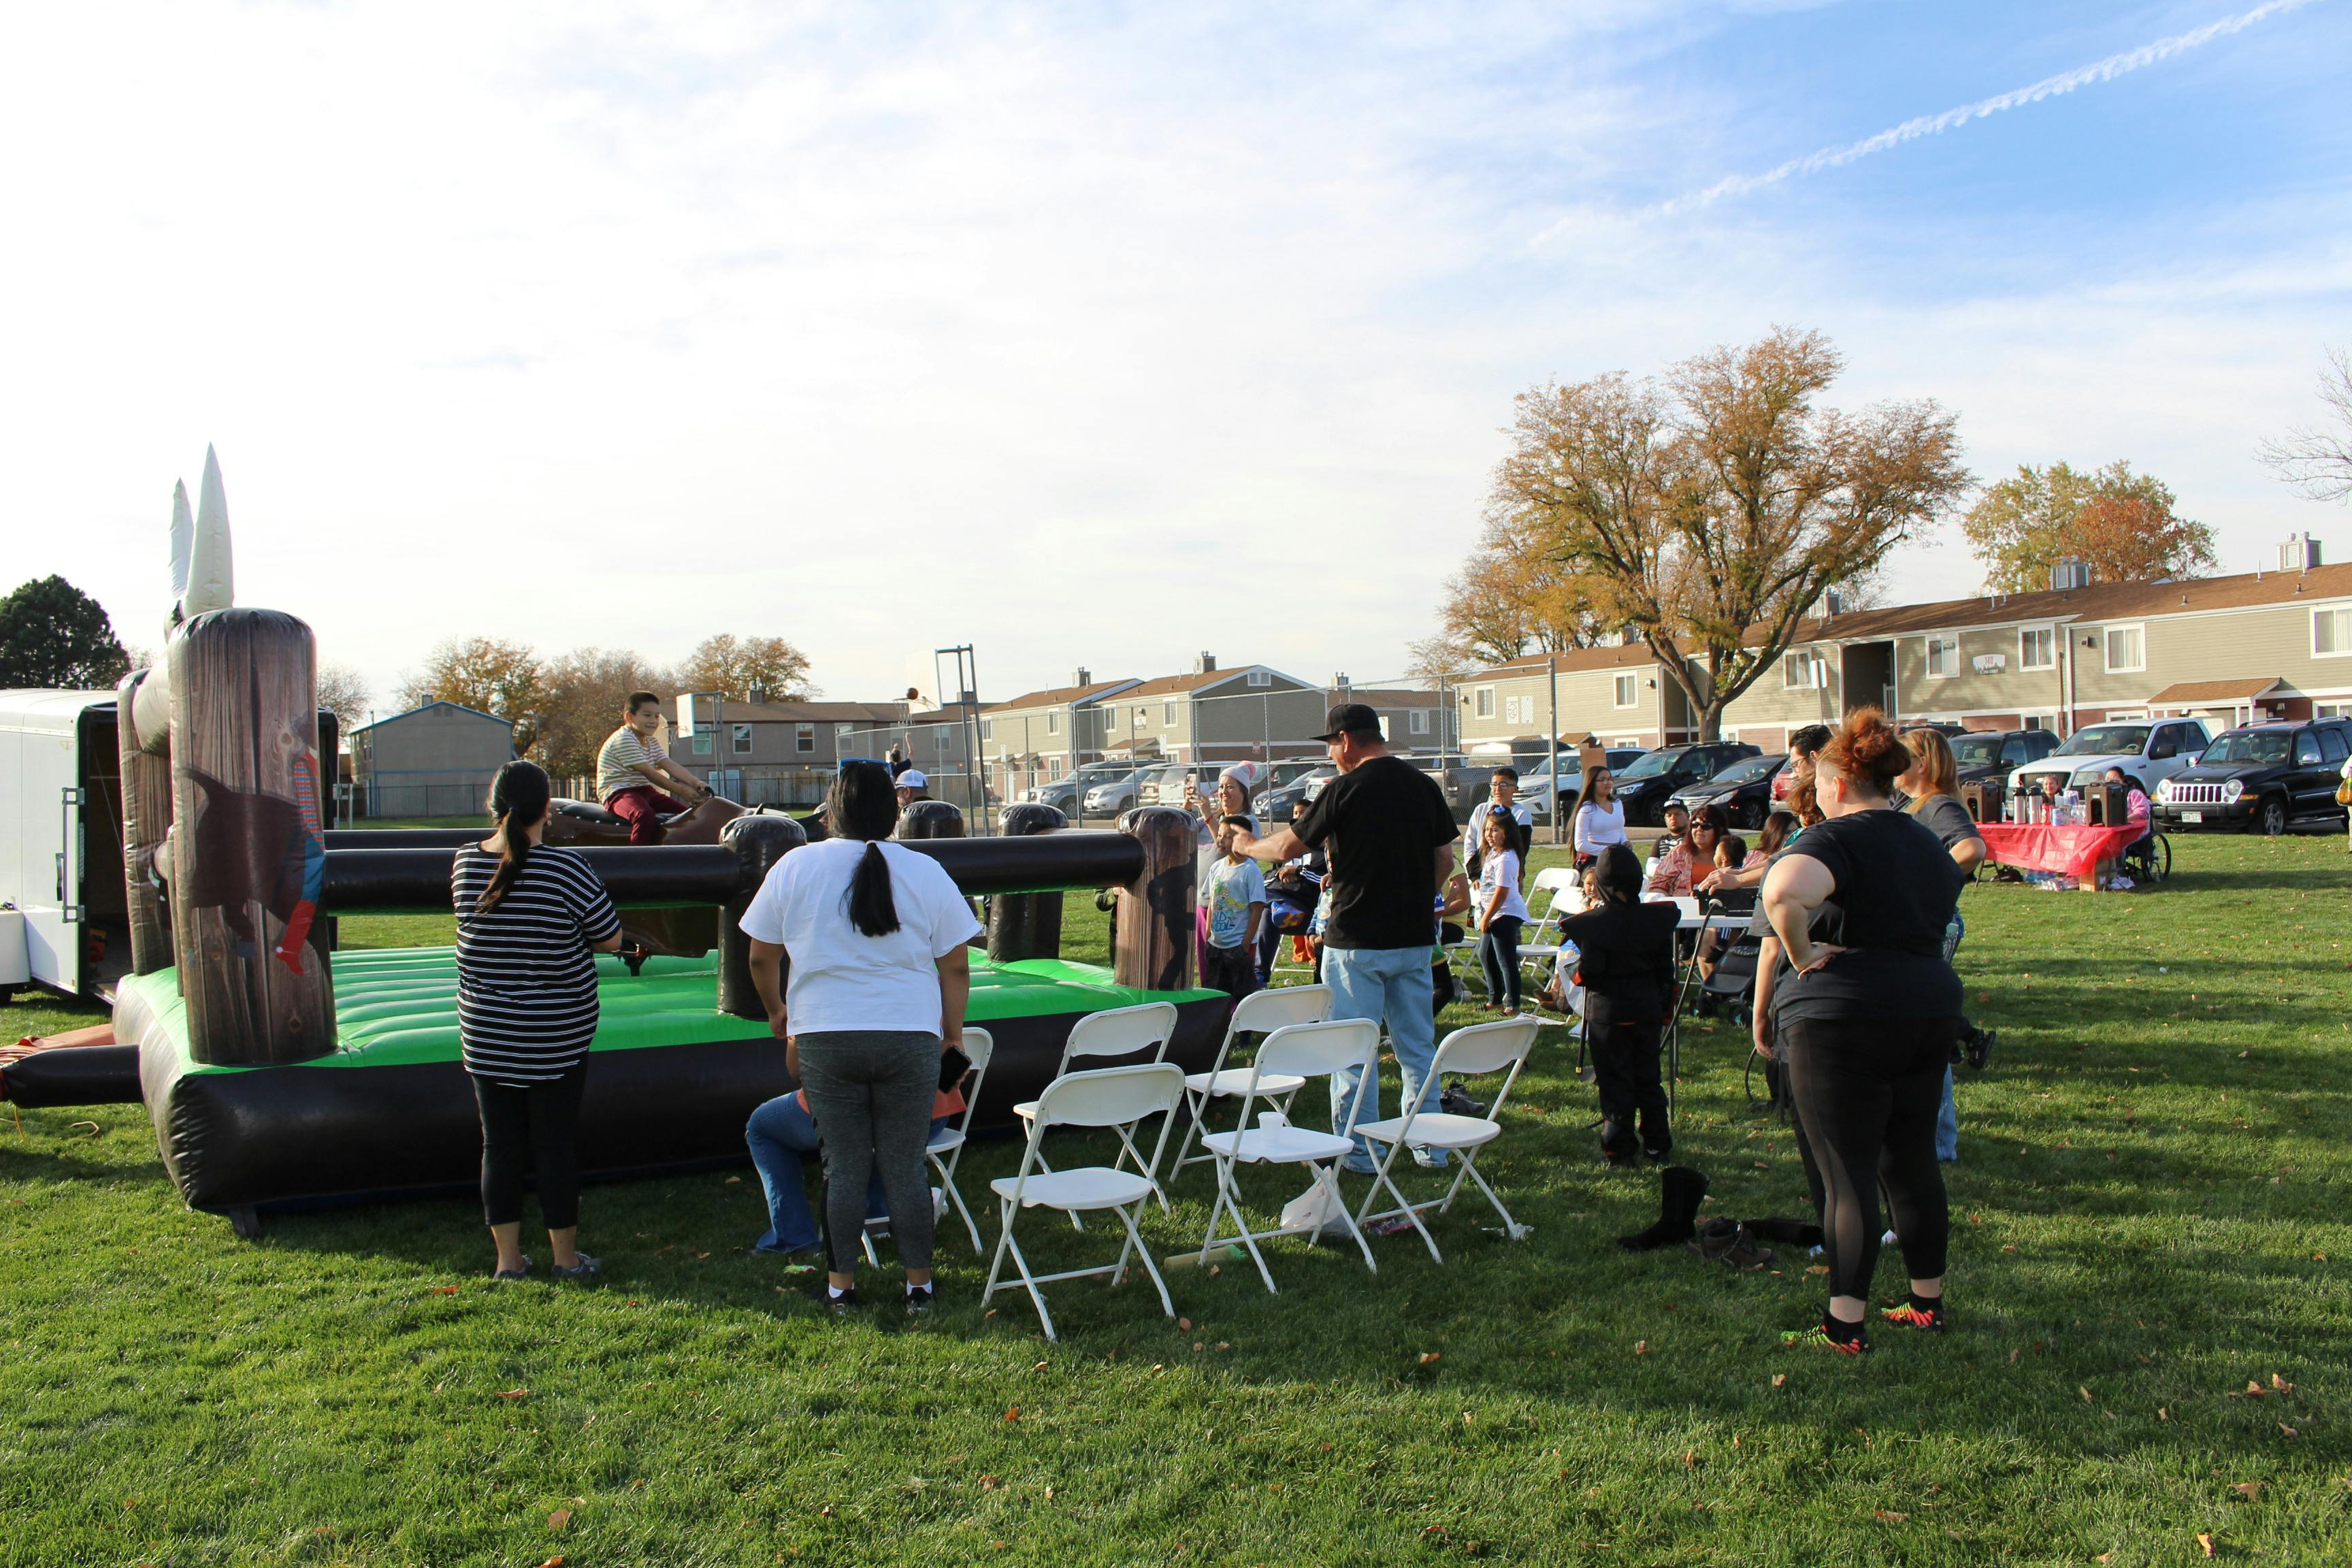 October 29 Walk With Me in the Park event mechanical bull riding